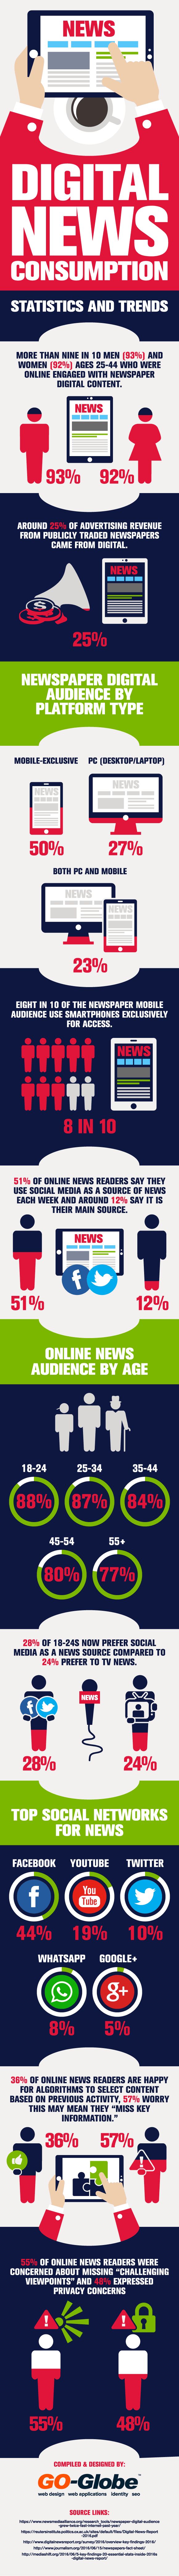 Digital-Marketing-How-Digital-News-Consumption-is-Shaping-the-Future-of-Advertising-Infographic Digital Marketing : How Digital News Consumption is Shaping the Future of Advertising - #Infographic